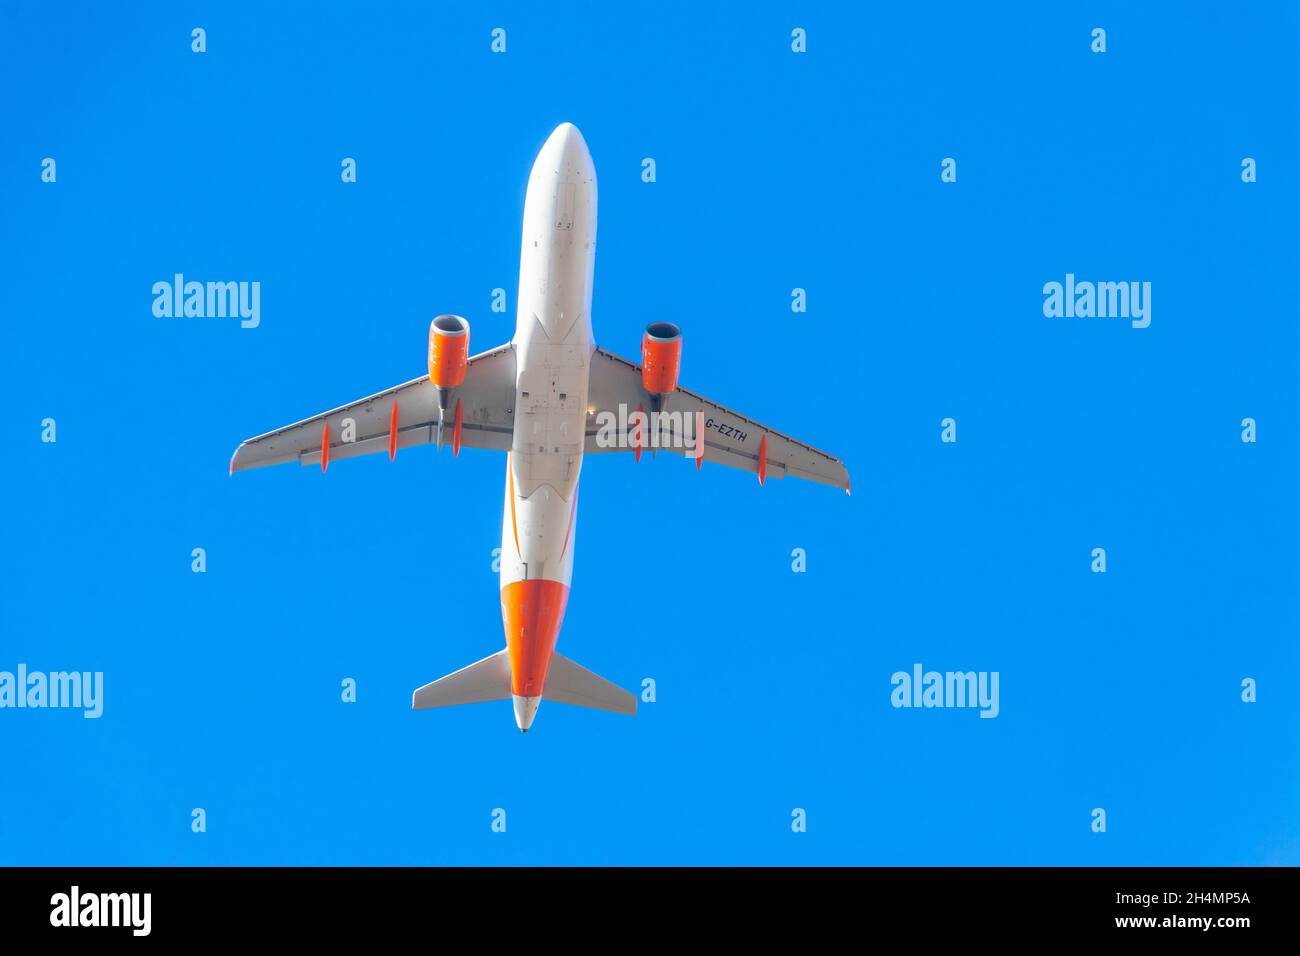 underside of EasyJet holiday flight jet aircraft taking off from Palma  Mallorca Airport against blue sky Stock Photo - Alamy